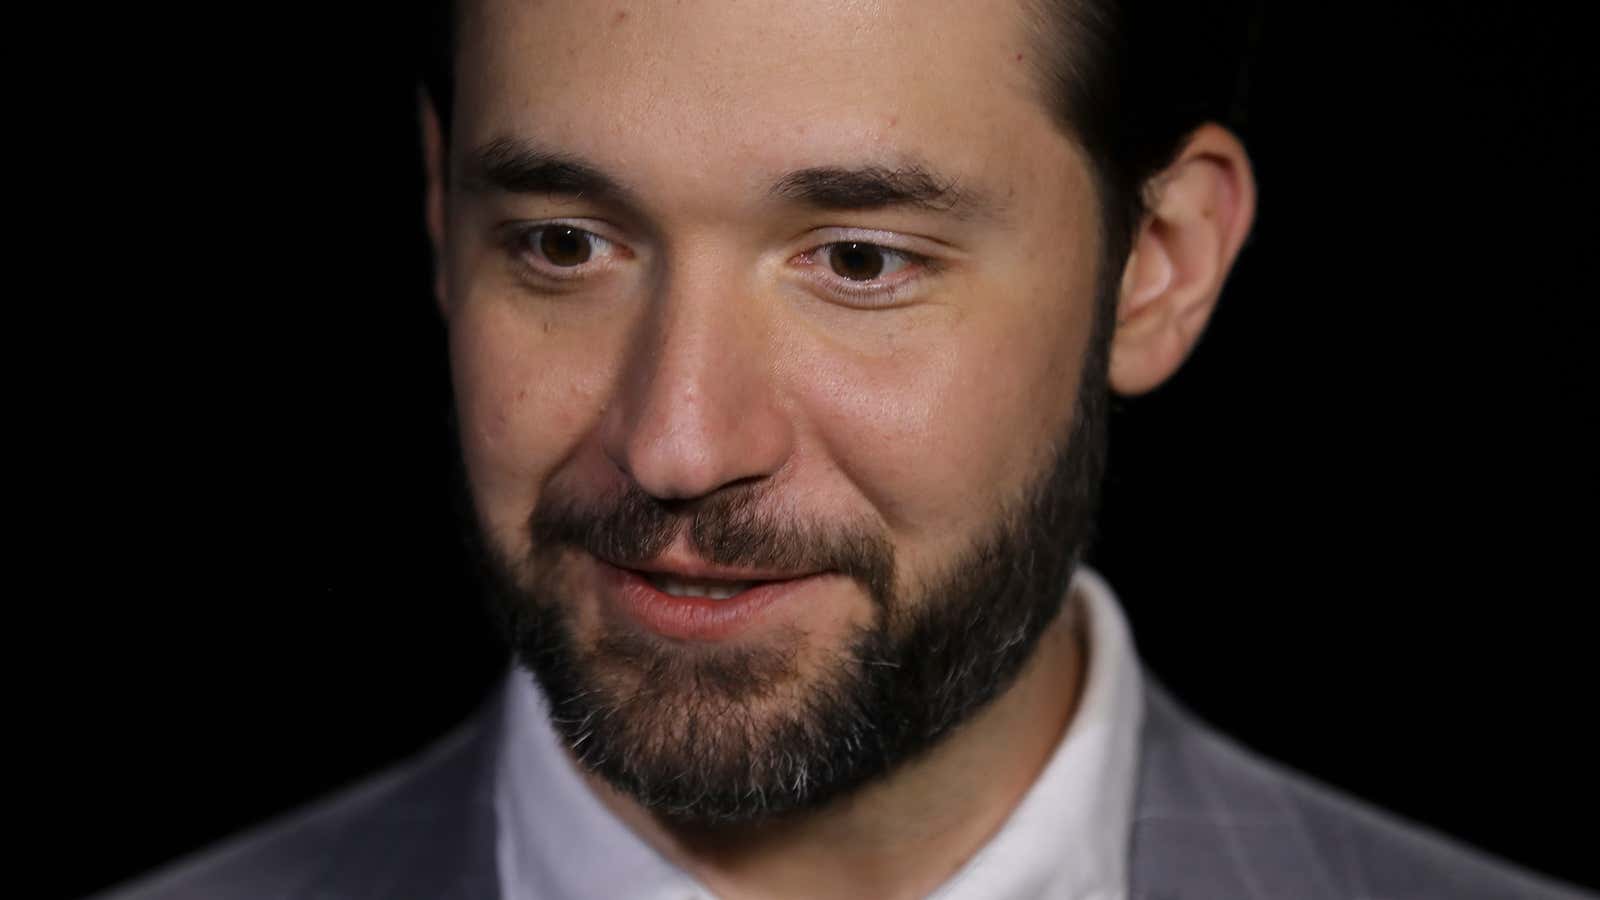 Alexis Ohanian, founder of the social media company Reddit, gives an interview in New York, Tuesday Feb. 19, 2019.